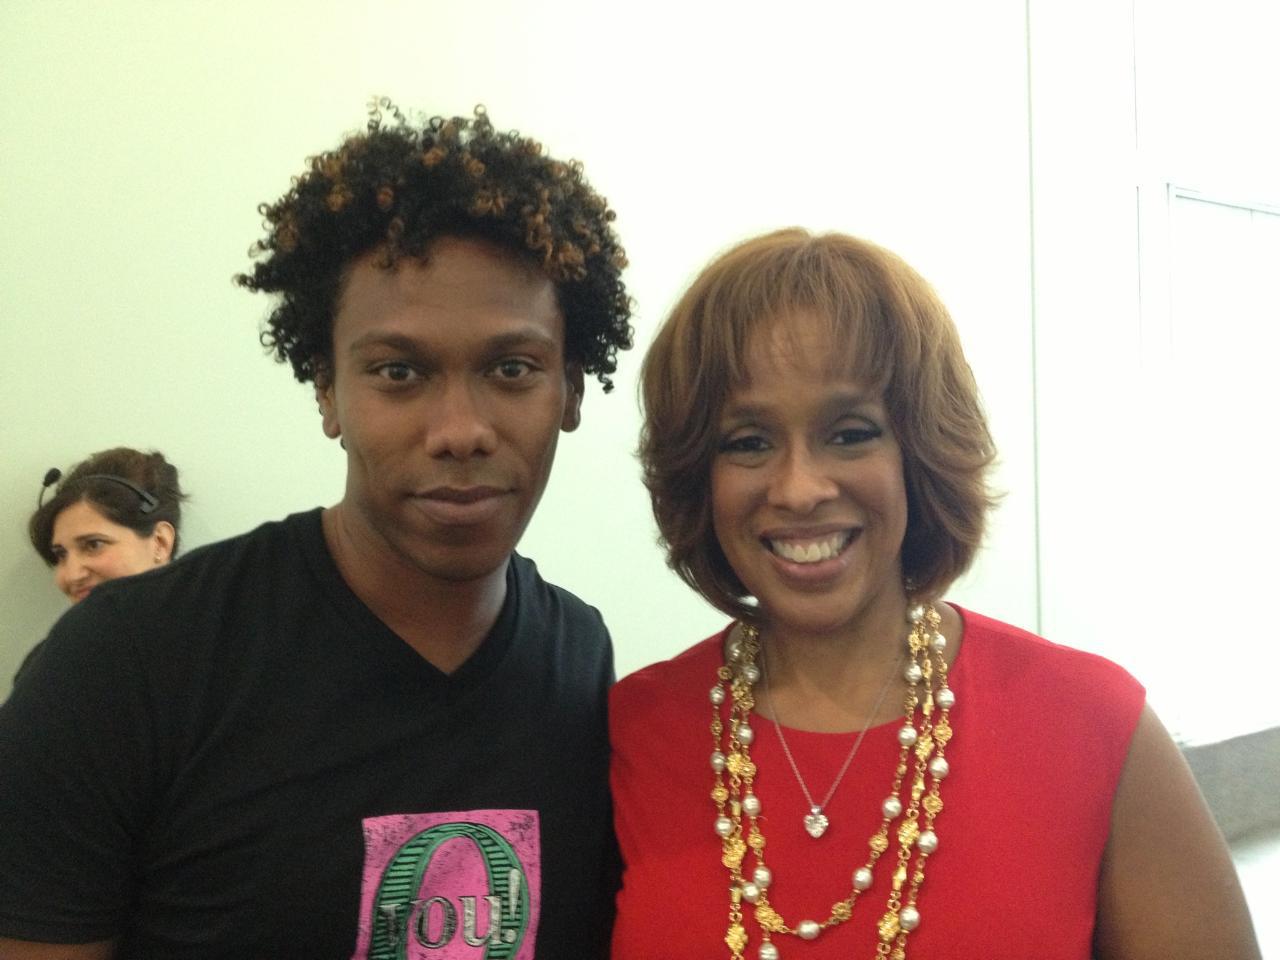 Jesse Lewis IV attends the O you! convention pictured with Gayle King, CBS This Morning co-host, & Editor-at-Large at O, The Oprah Magazine.